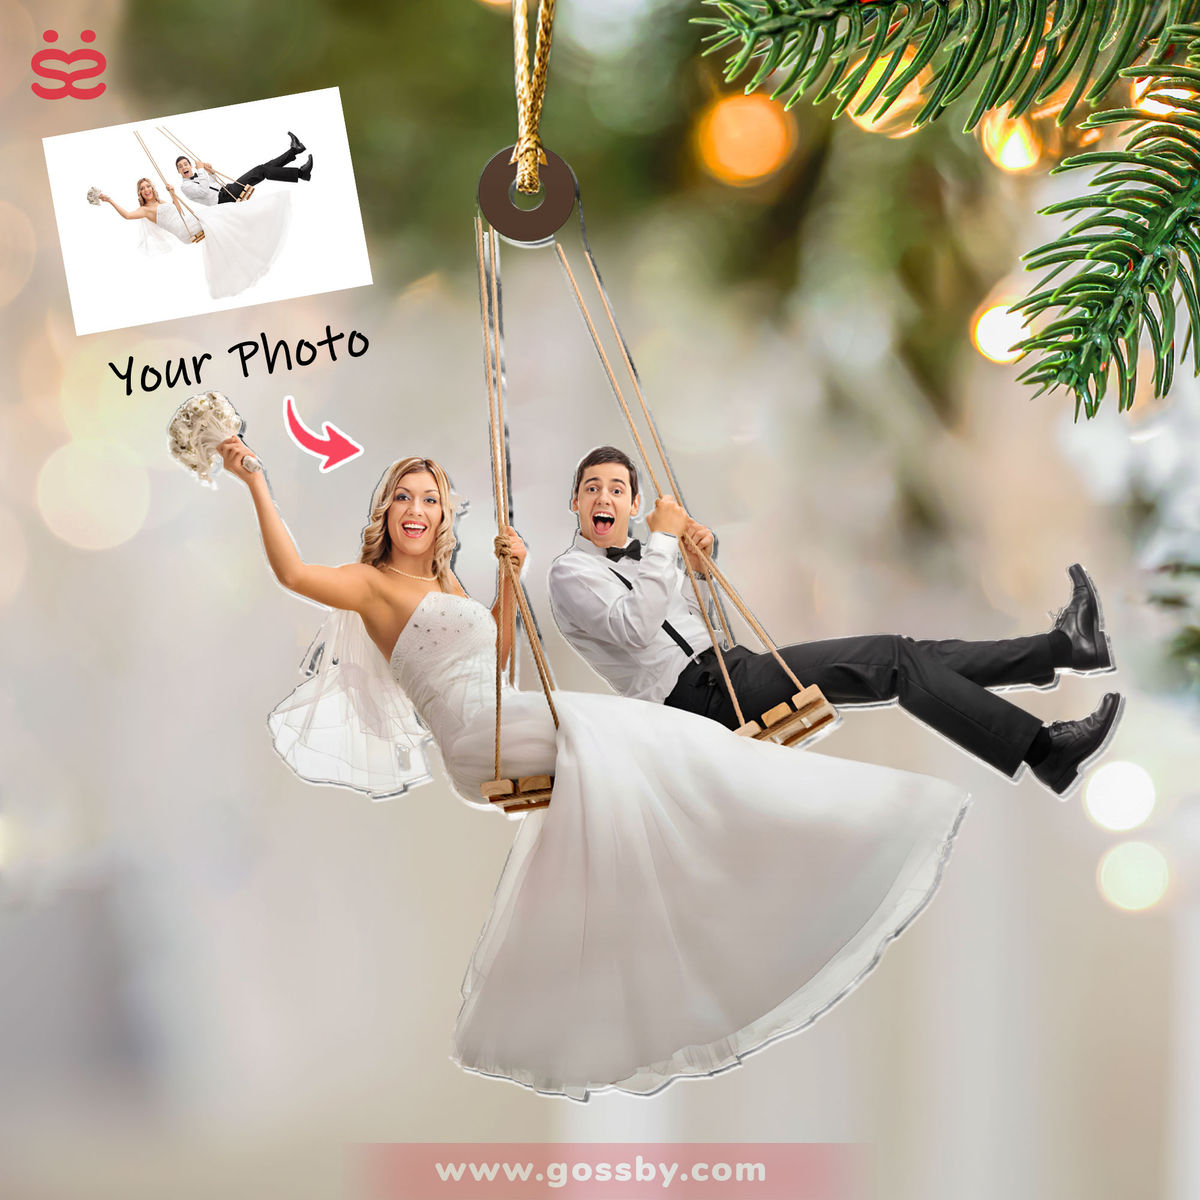 Customized Your Photo Ornaments - Wedding Gift - Gift for Couple - Couple Photo Gifts, Christmas Gifts for Couple